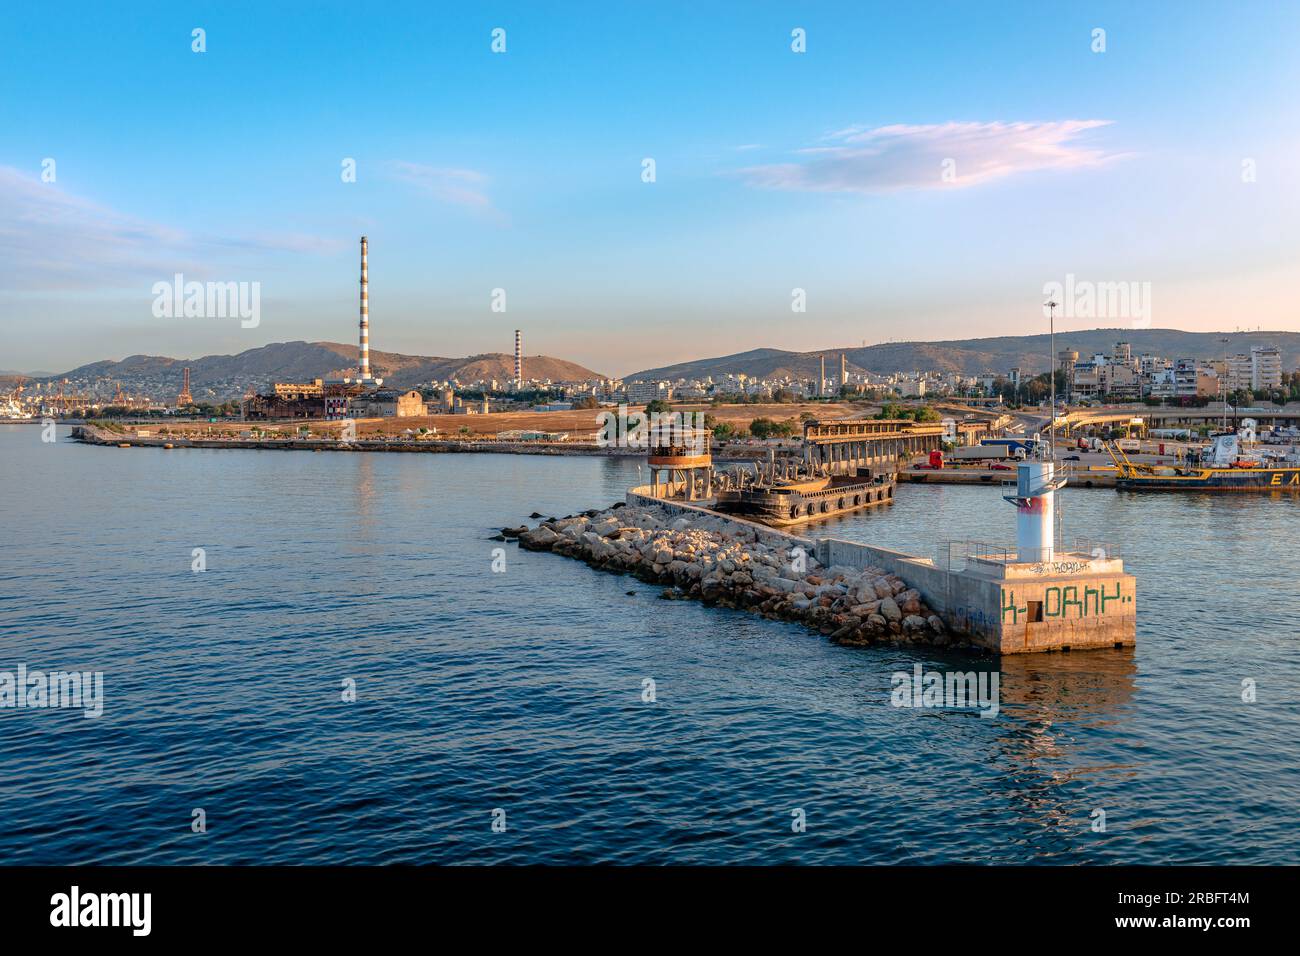 The entrance of the harbor of Piraeus in Greece, with the breakwater and the city of Piraeus with factory smokestacks in the background. Stock Photo